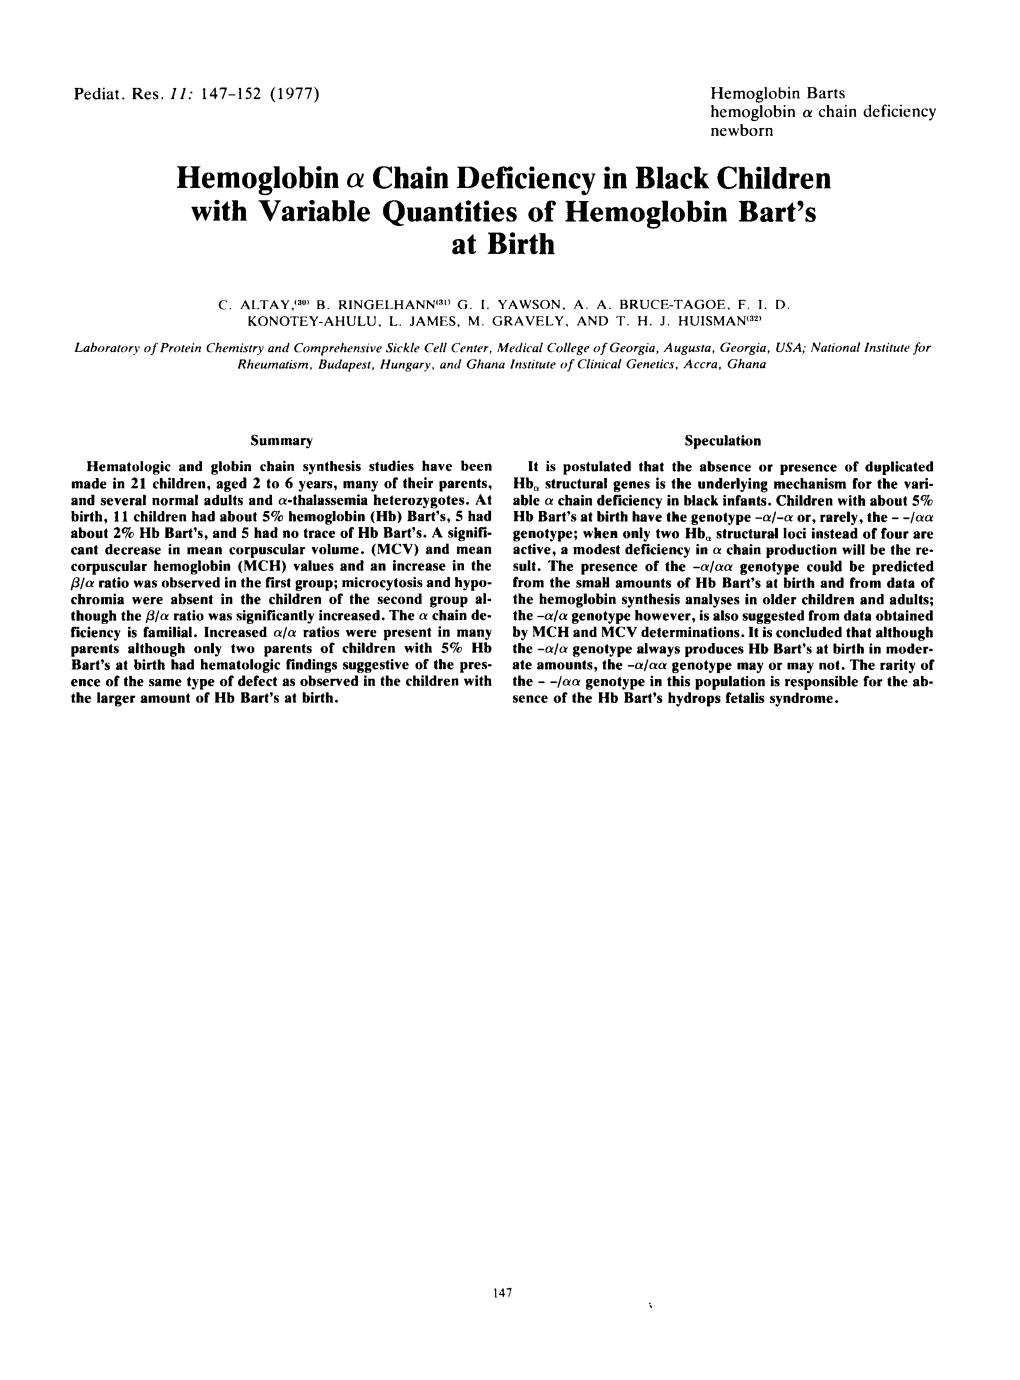 Hemoglobin a Chain Deficiency in Black Children with Variable Quantities of Hemoglobin Bart's at Birth